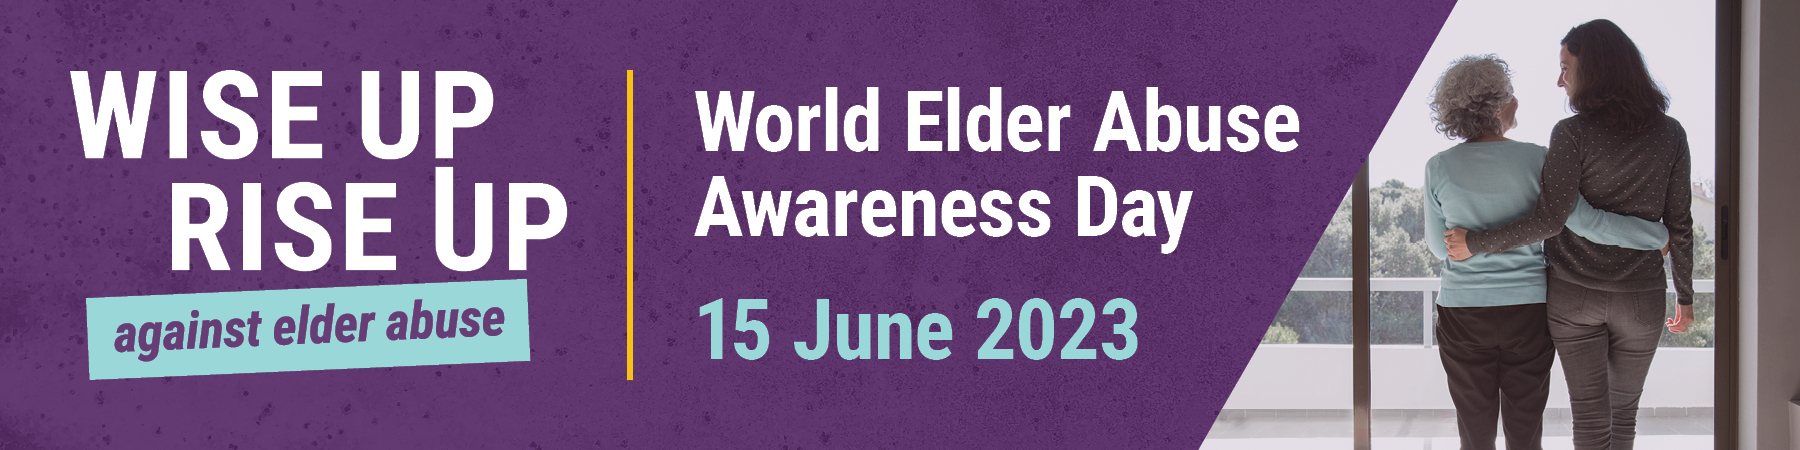 Image two women and the words Wise Up Rise Up 15 June 2023 World Elder Abuse Awareness Day